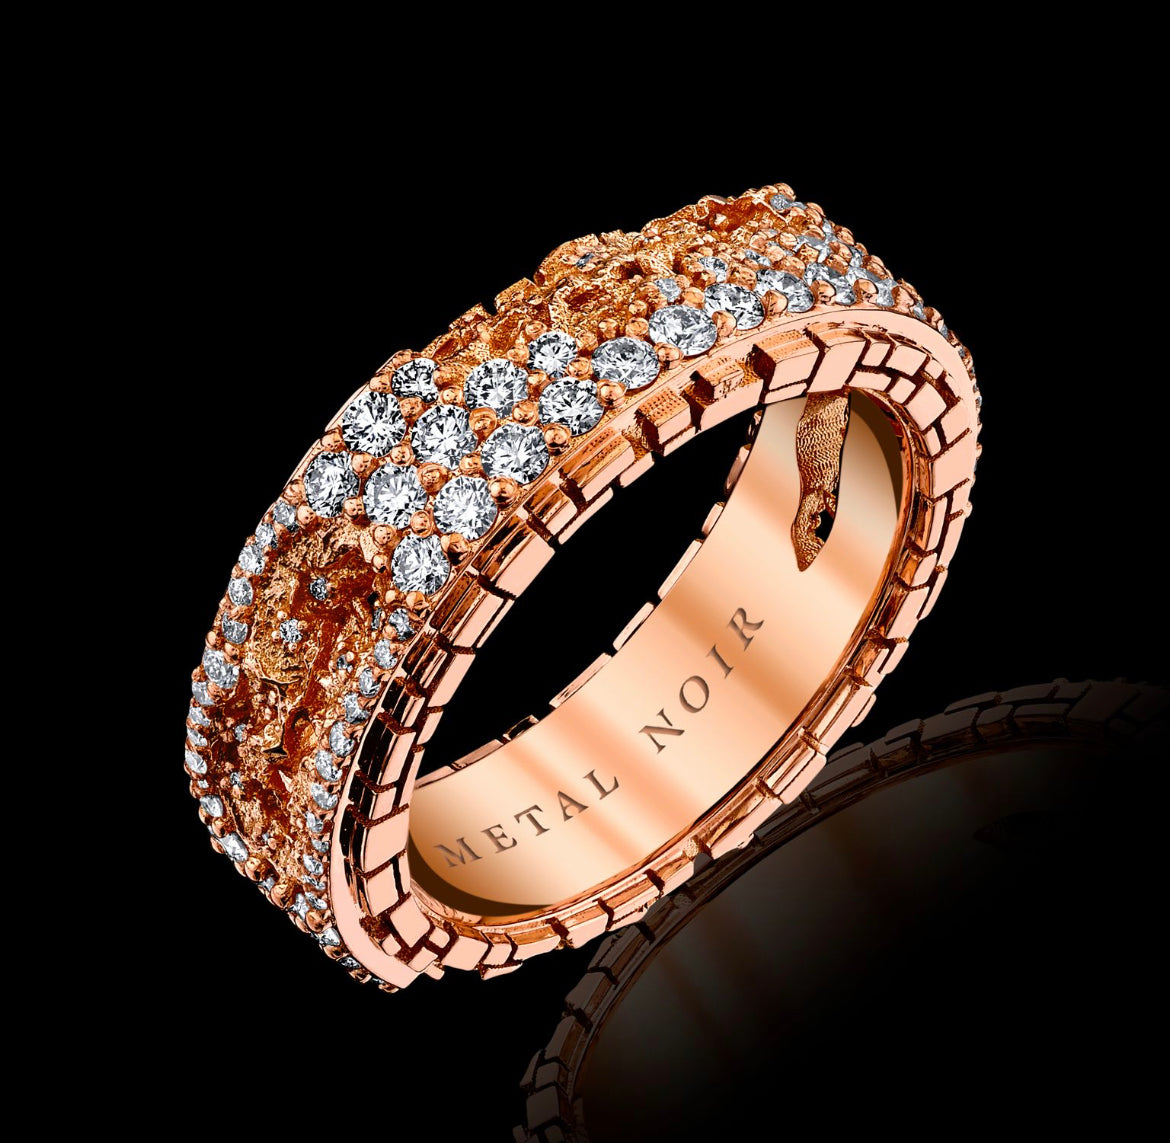 ‘Eroded Architecture’ XL Ring in solid 18k Rose gold with round brilliant diamonds • Edition of 30